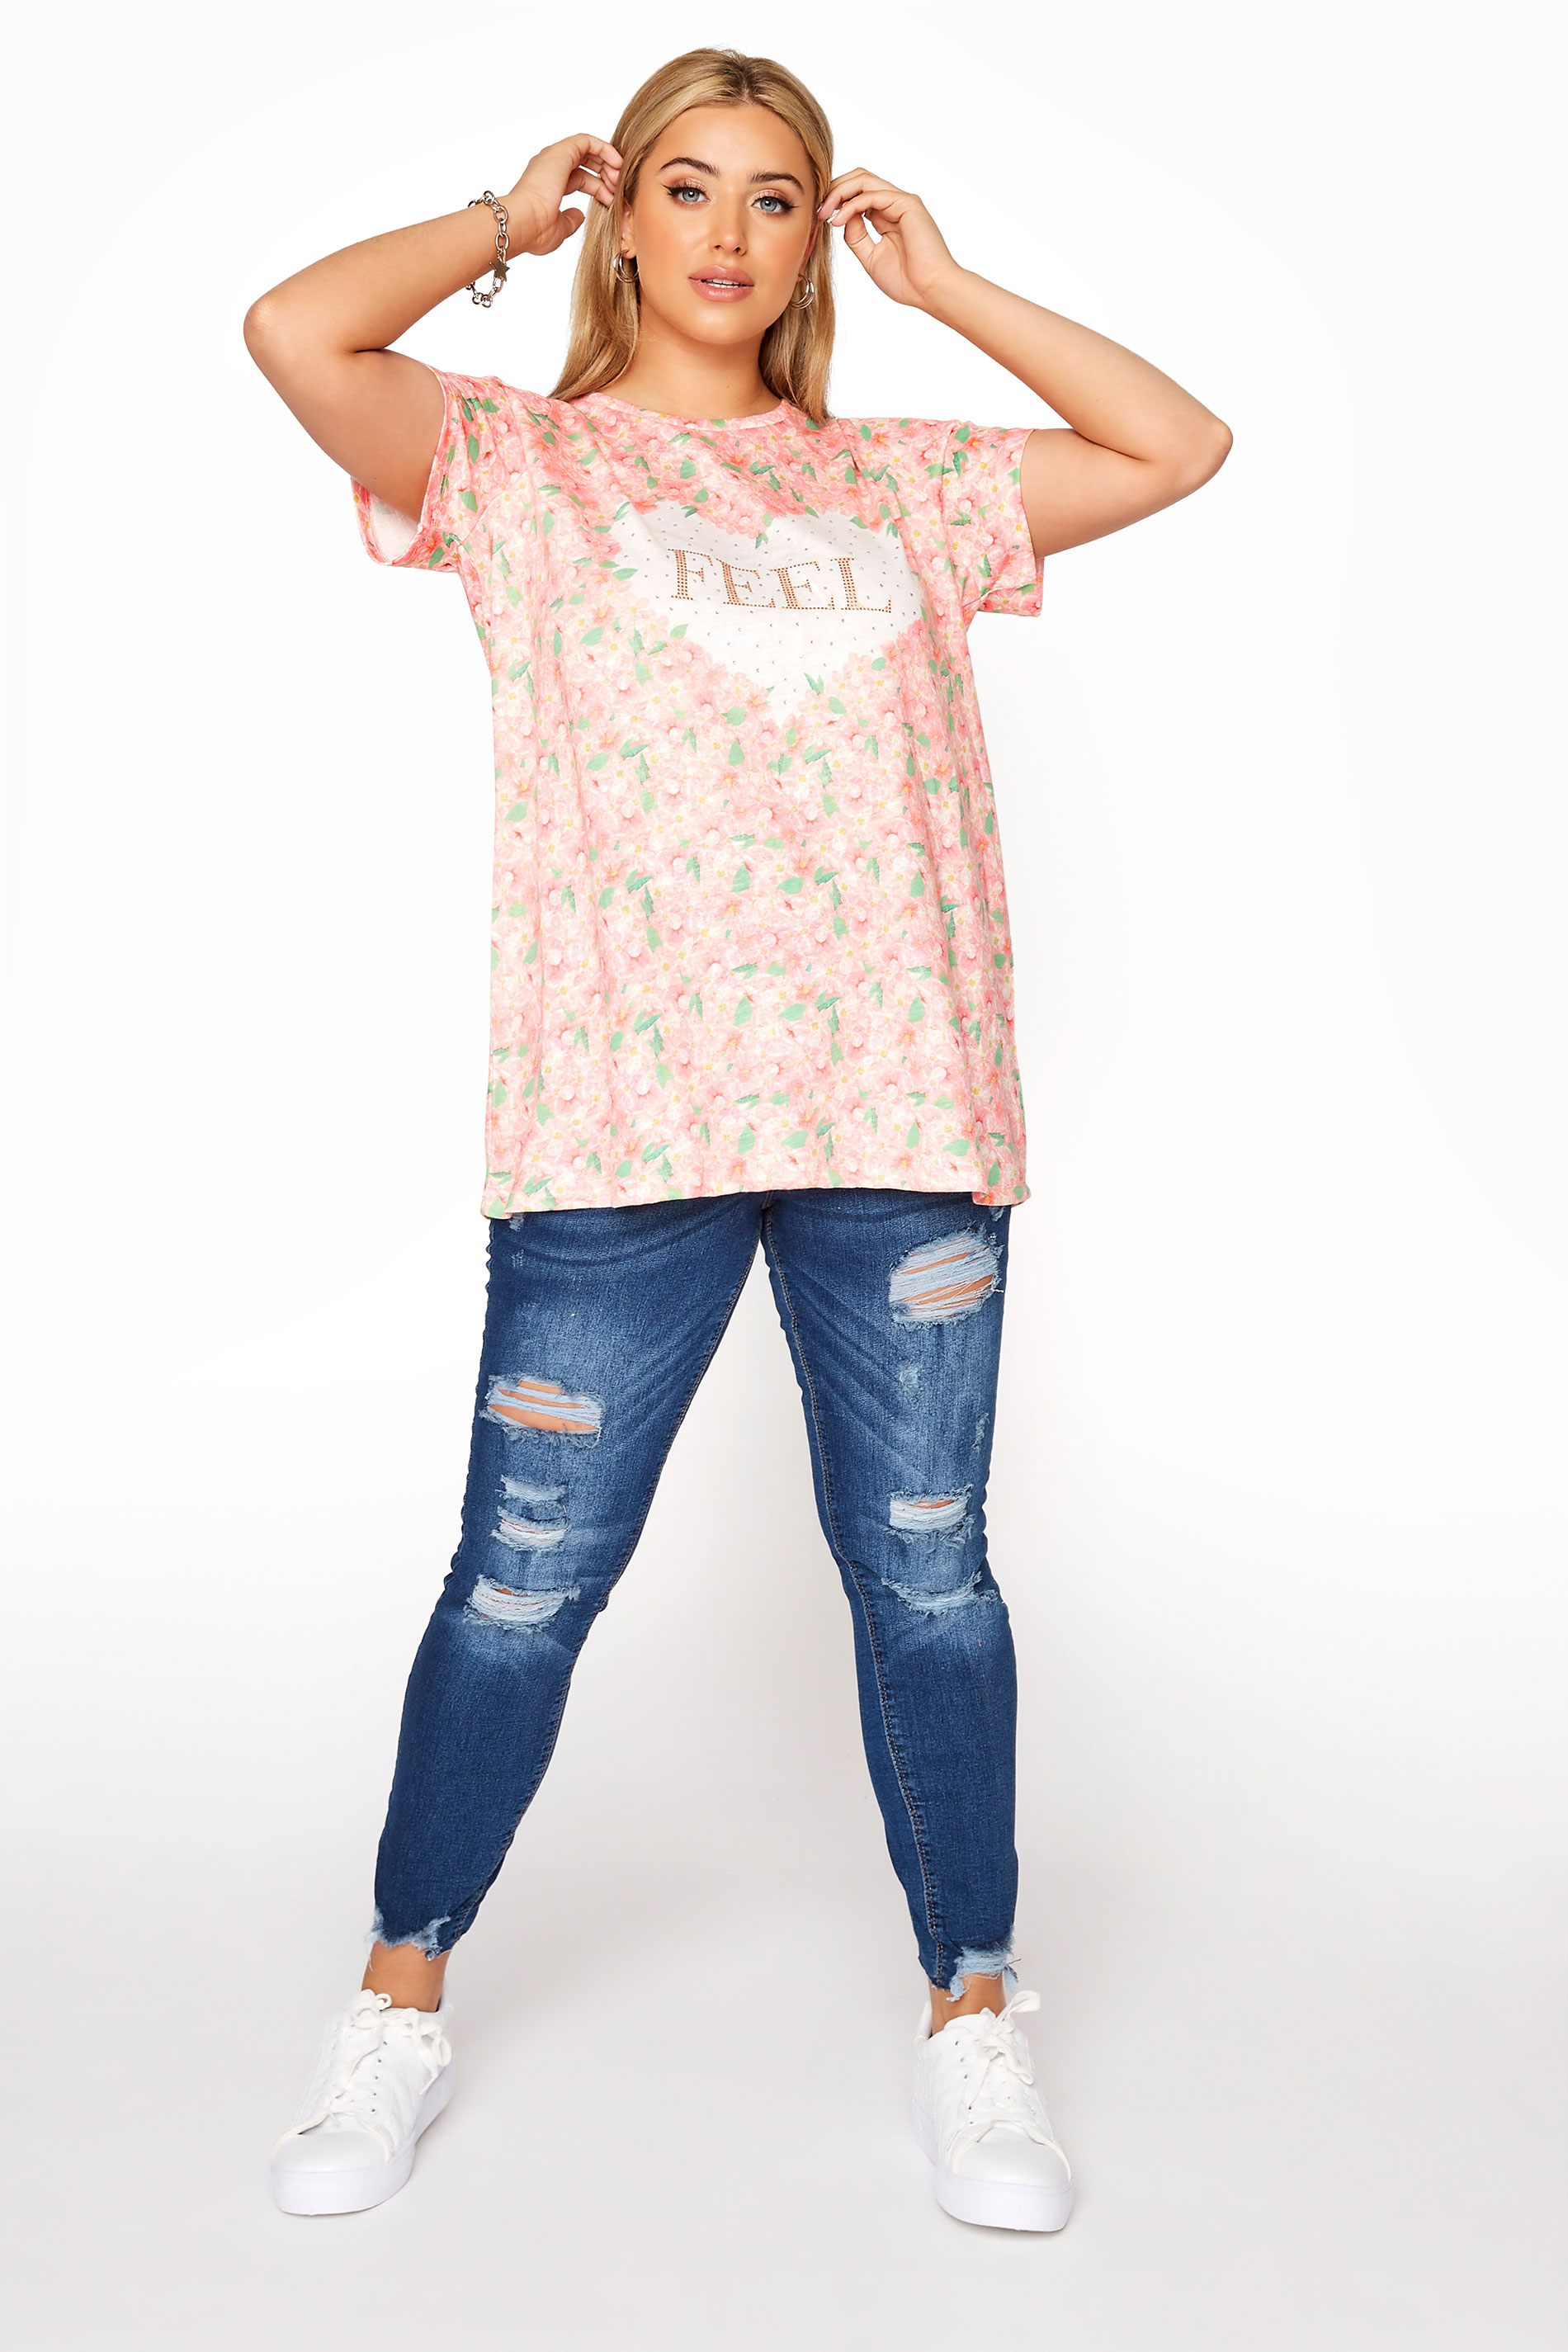 Grande taille  Tops Grande taille  T-Shirts | T-Shirt Rose Floral Coeur 'Feel' - WB02542